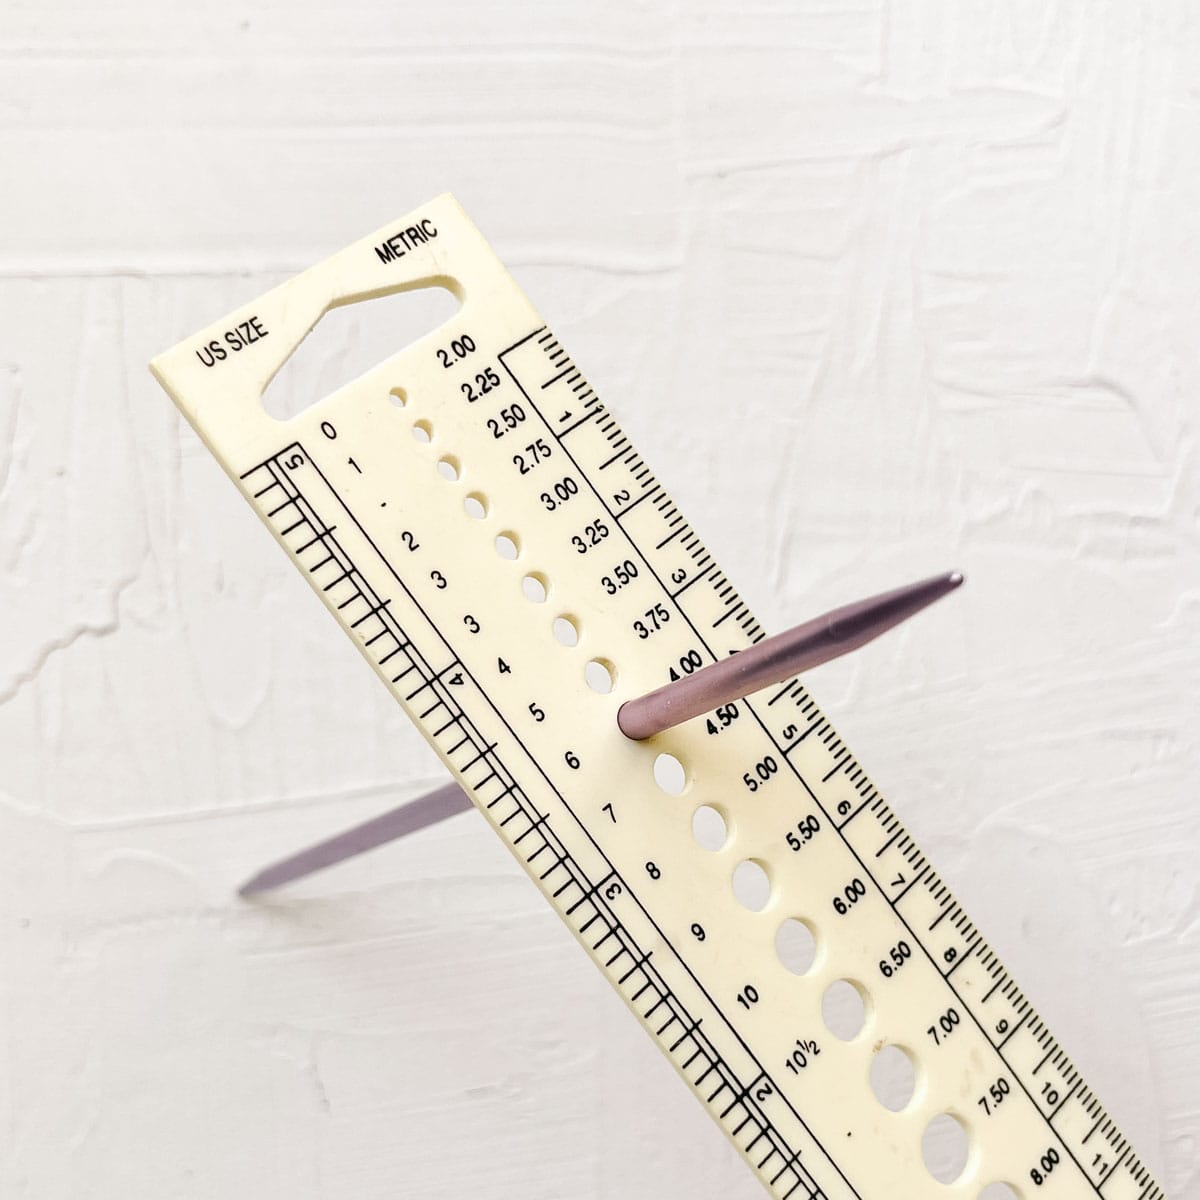 A knitting needle gauge measuring the diameter of a DPN.